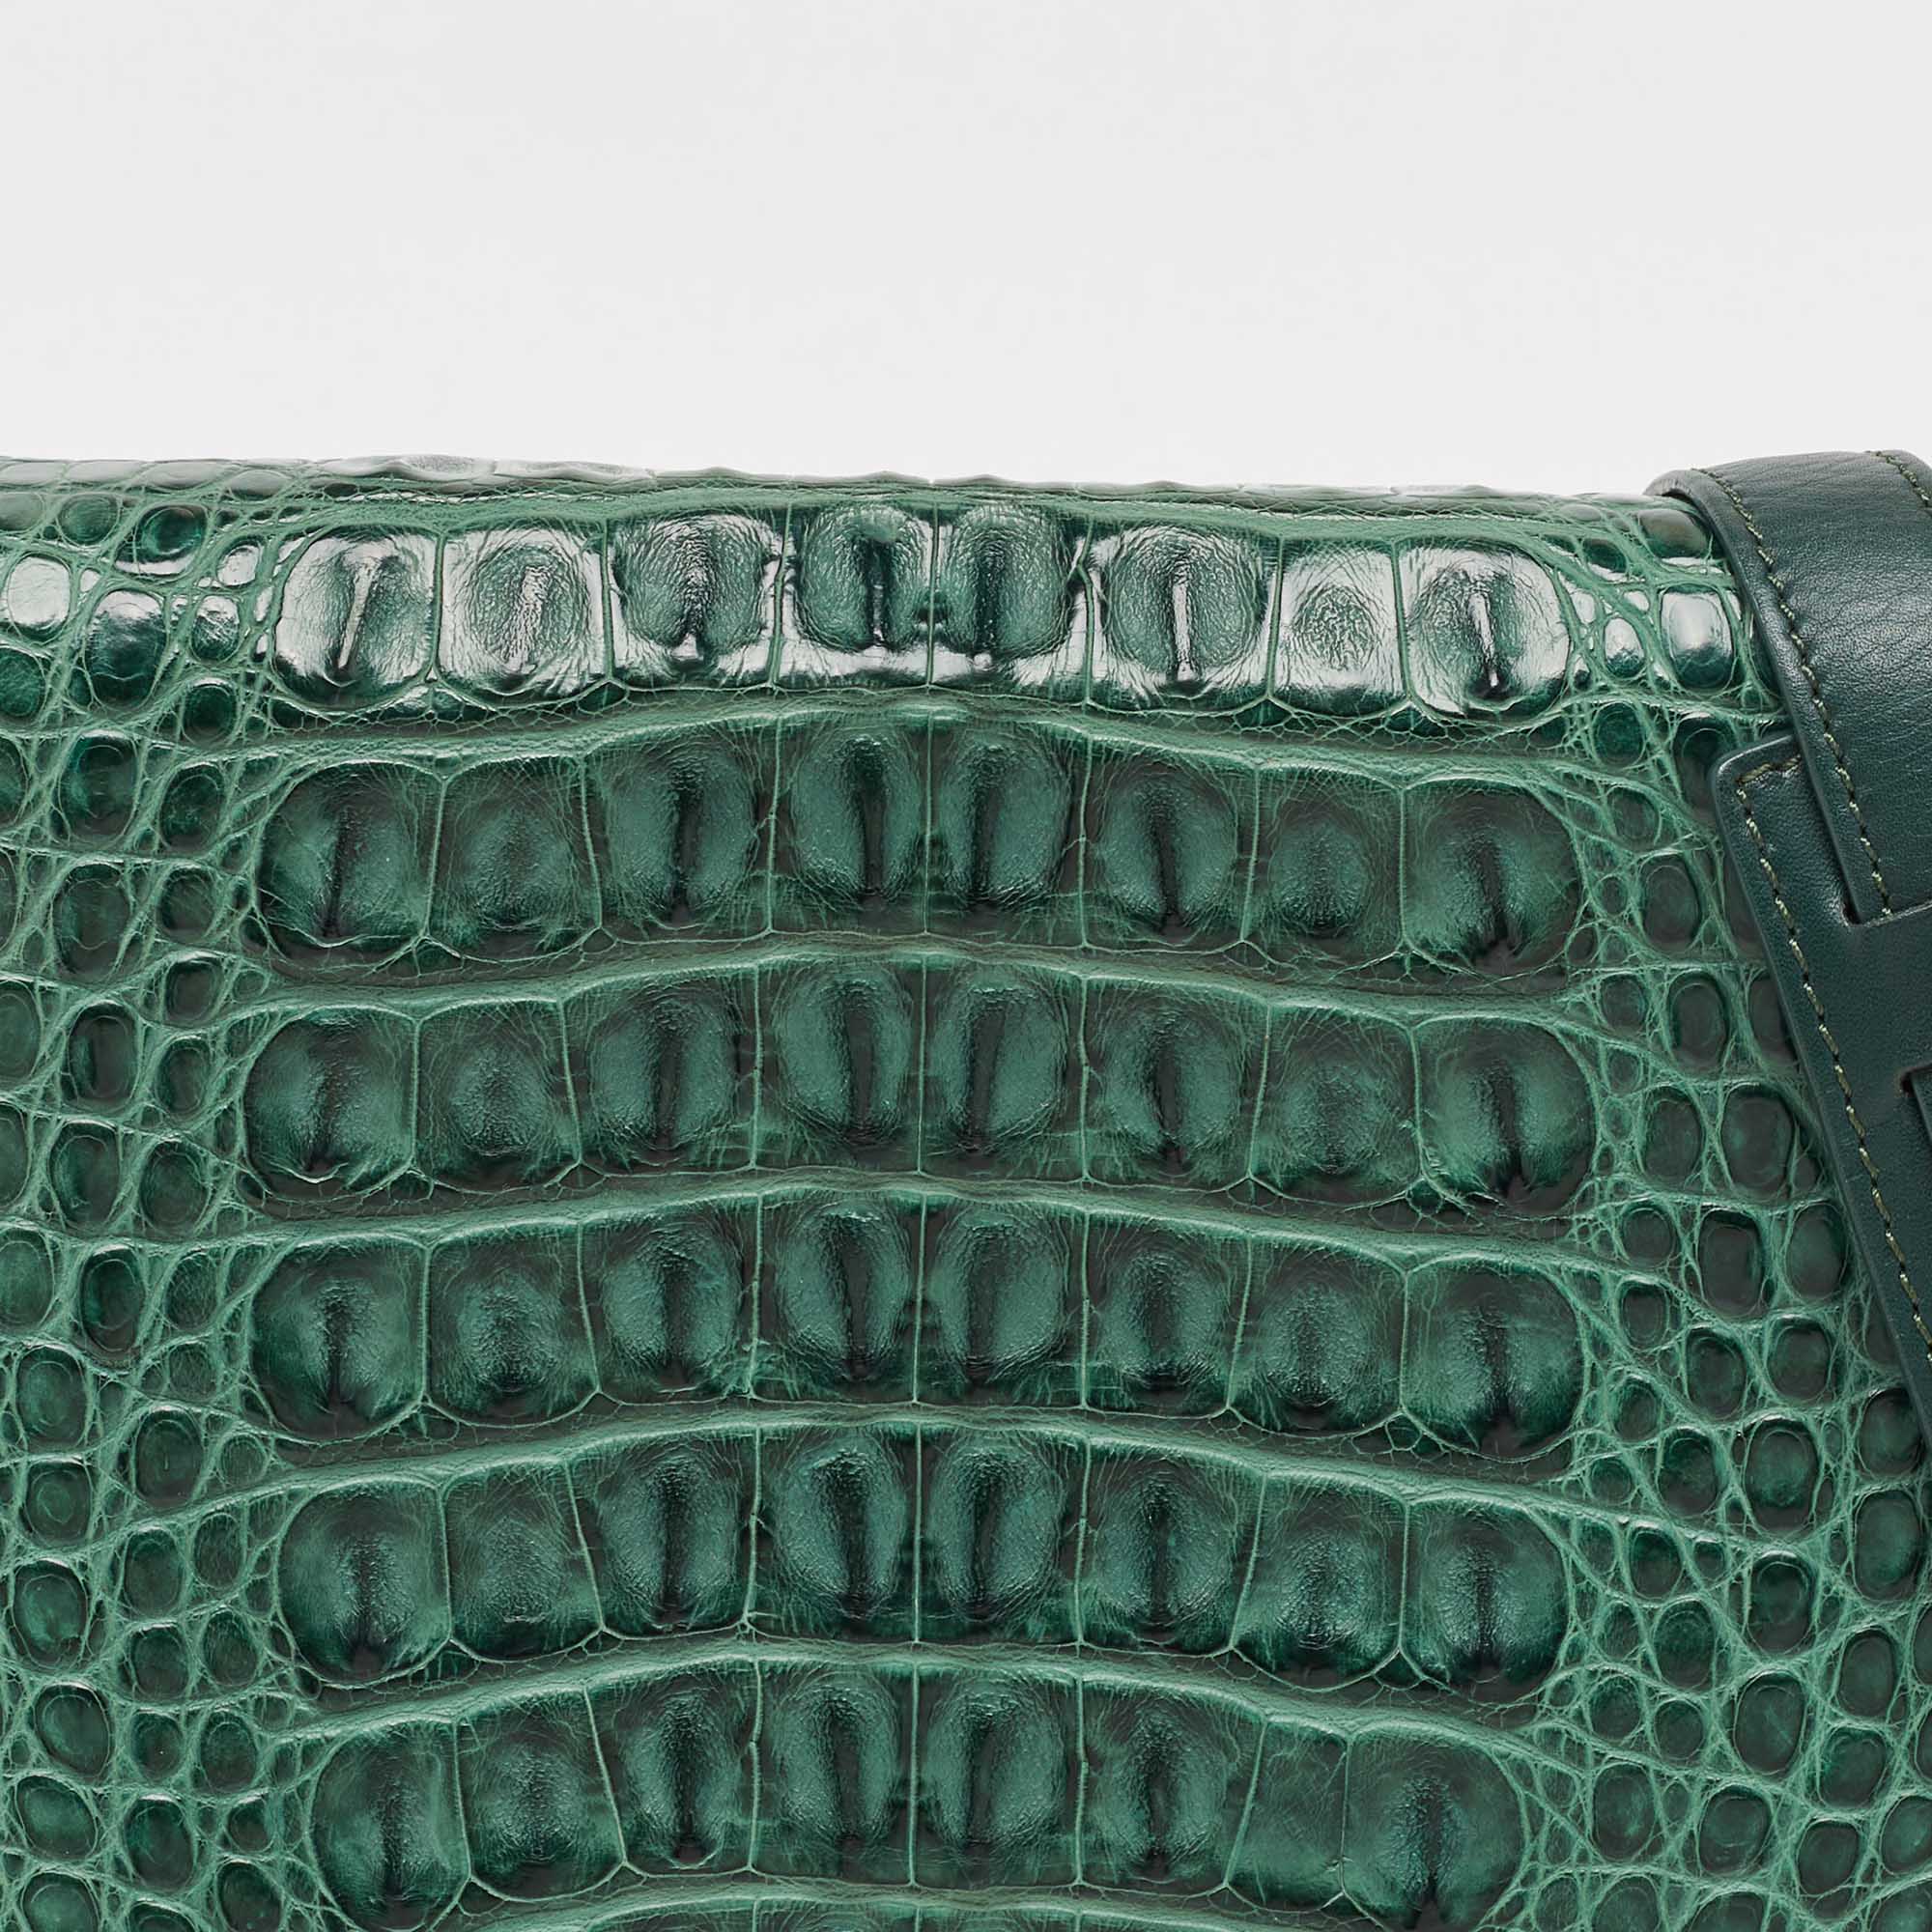 Celine Green Leather And Croc Medium Trapeze Top Handle Bag